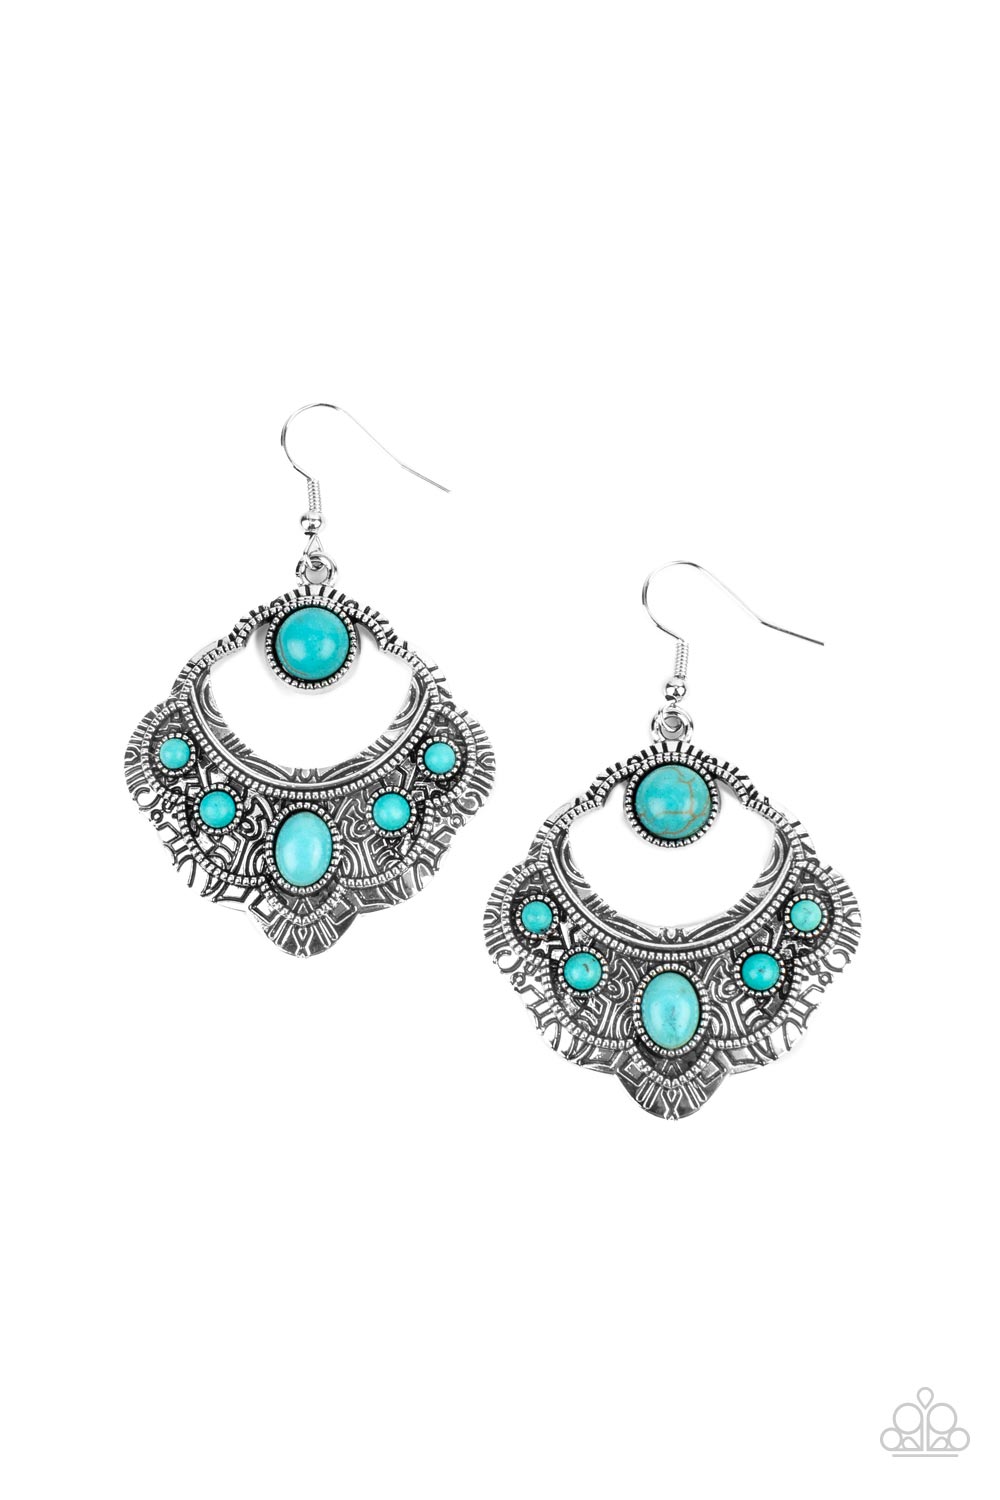 Saguaro Sunset - Blue Turquoise Stone - Silver Earrings - Paparazzi Accessories - An earthy assortment of oval and round turquoise stones adorn the front of a scalloped silver frame that is studded and engraved in tribal inspired details. Earring attaches to a standard fishhook fitting.